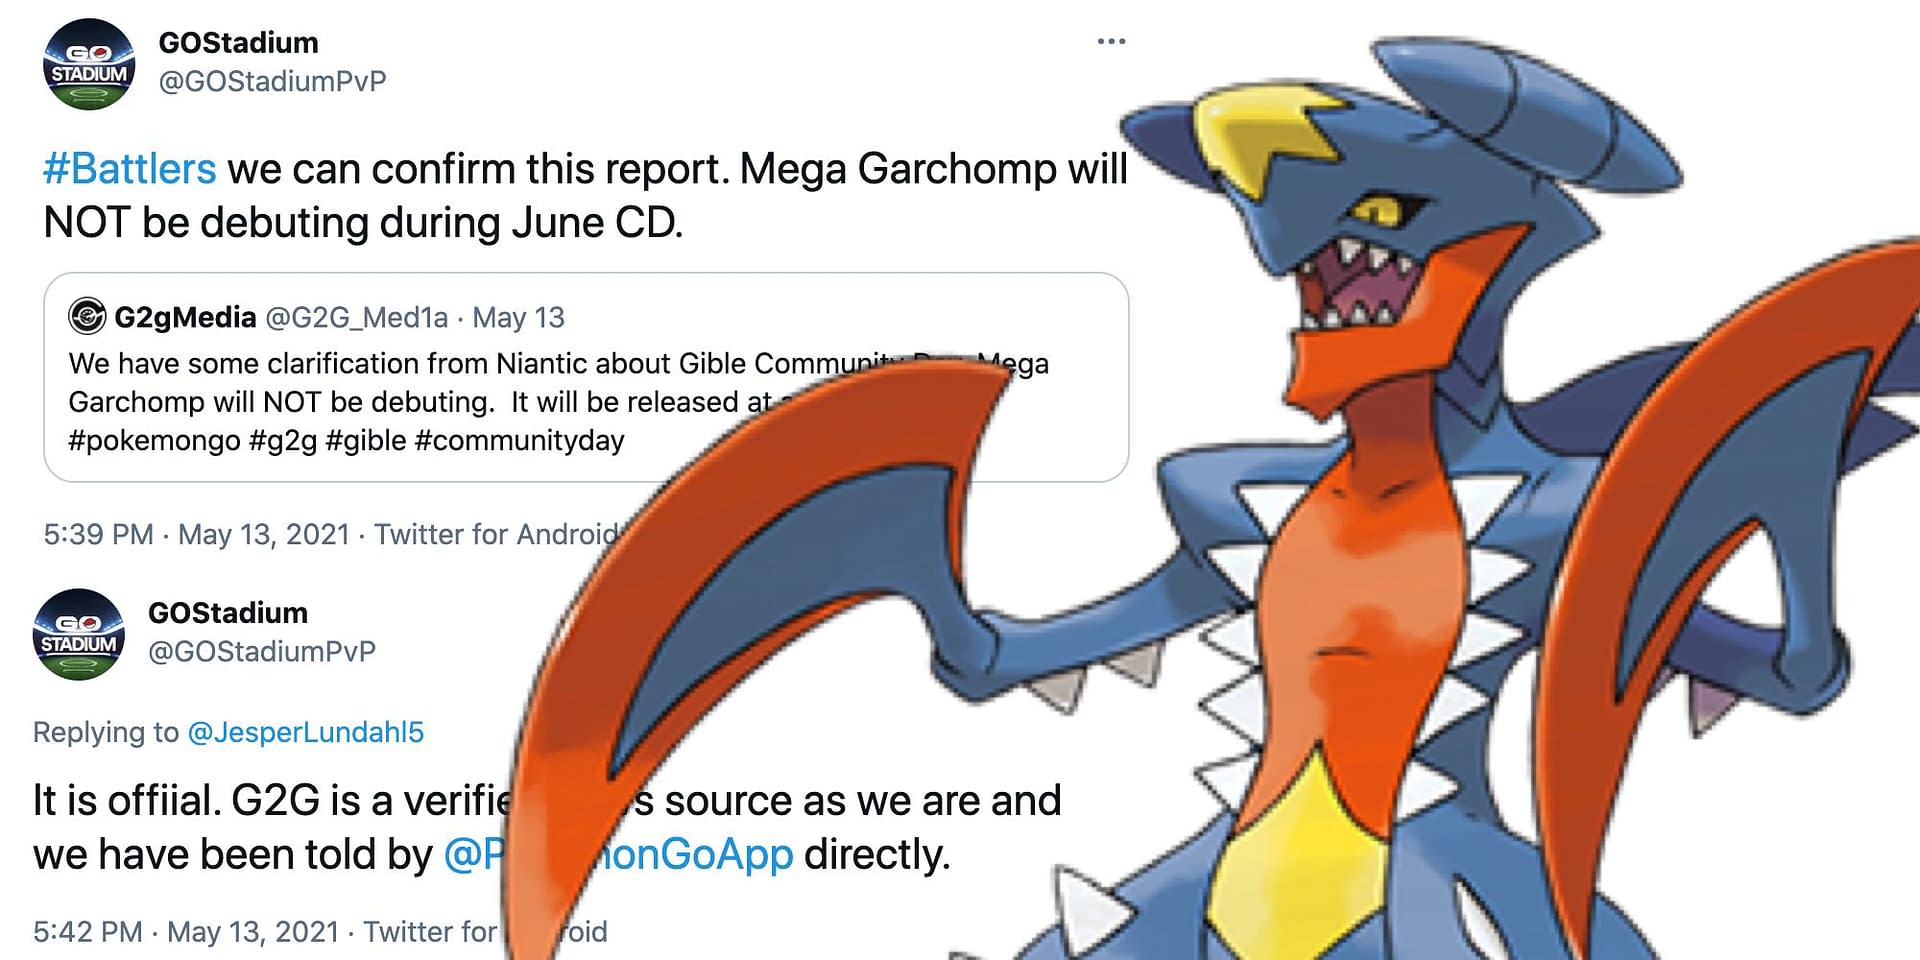 shiny garchomp difference